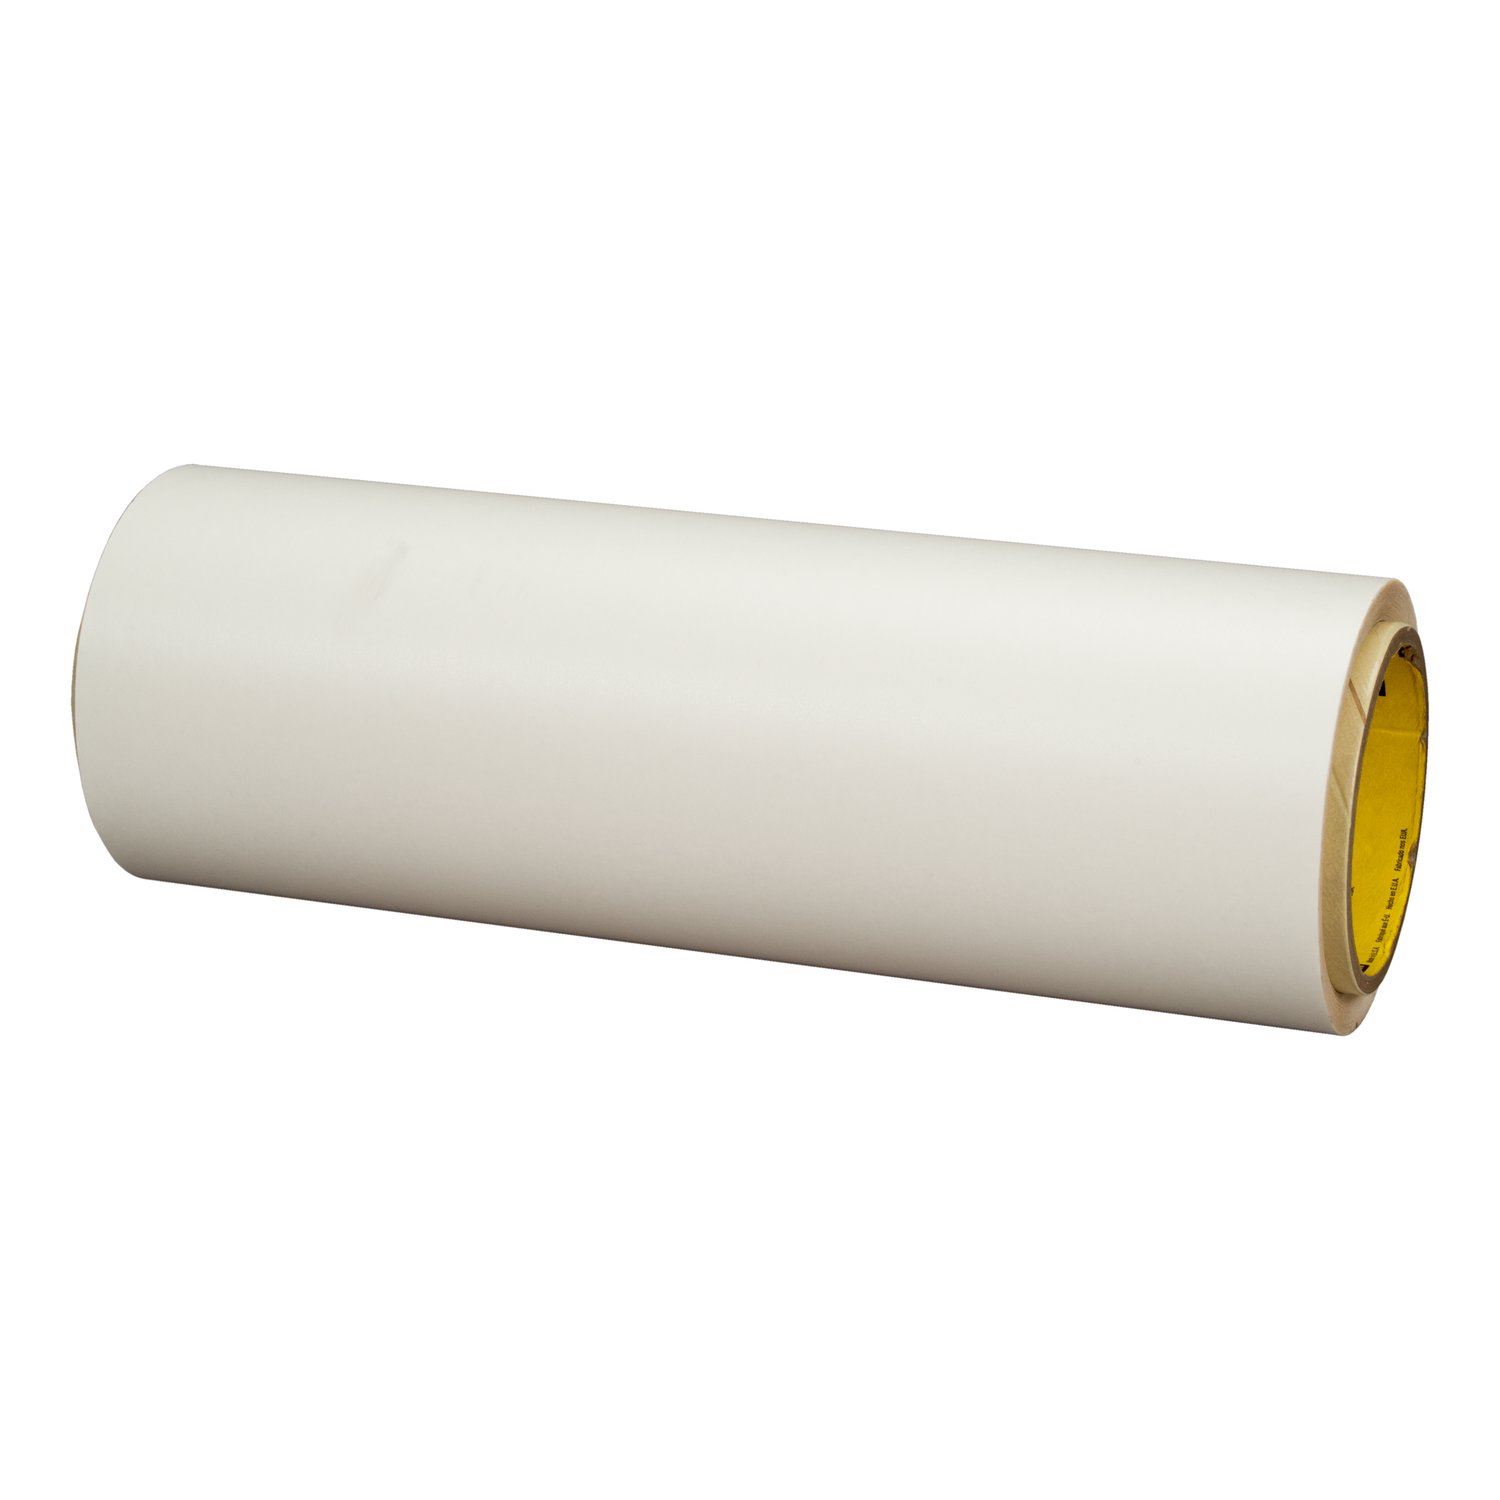 7100308764 - 3M Adhesive Transfer Tape 9773WL+, Clear, 3 mil, Roll, Config